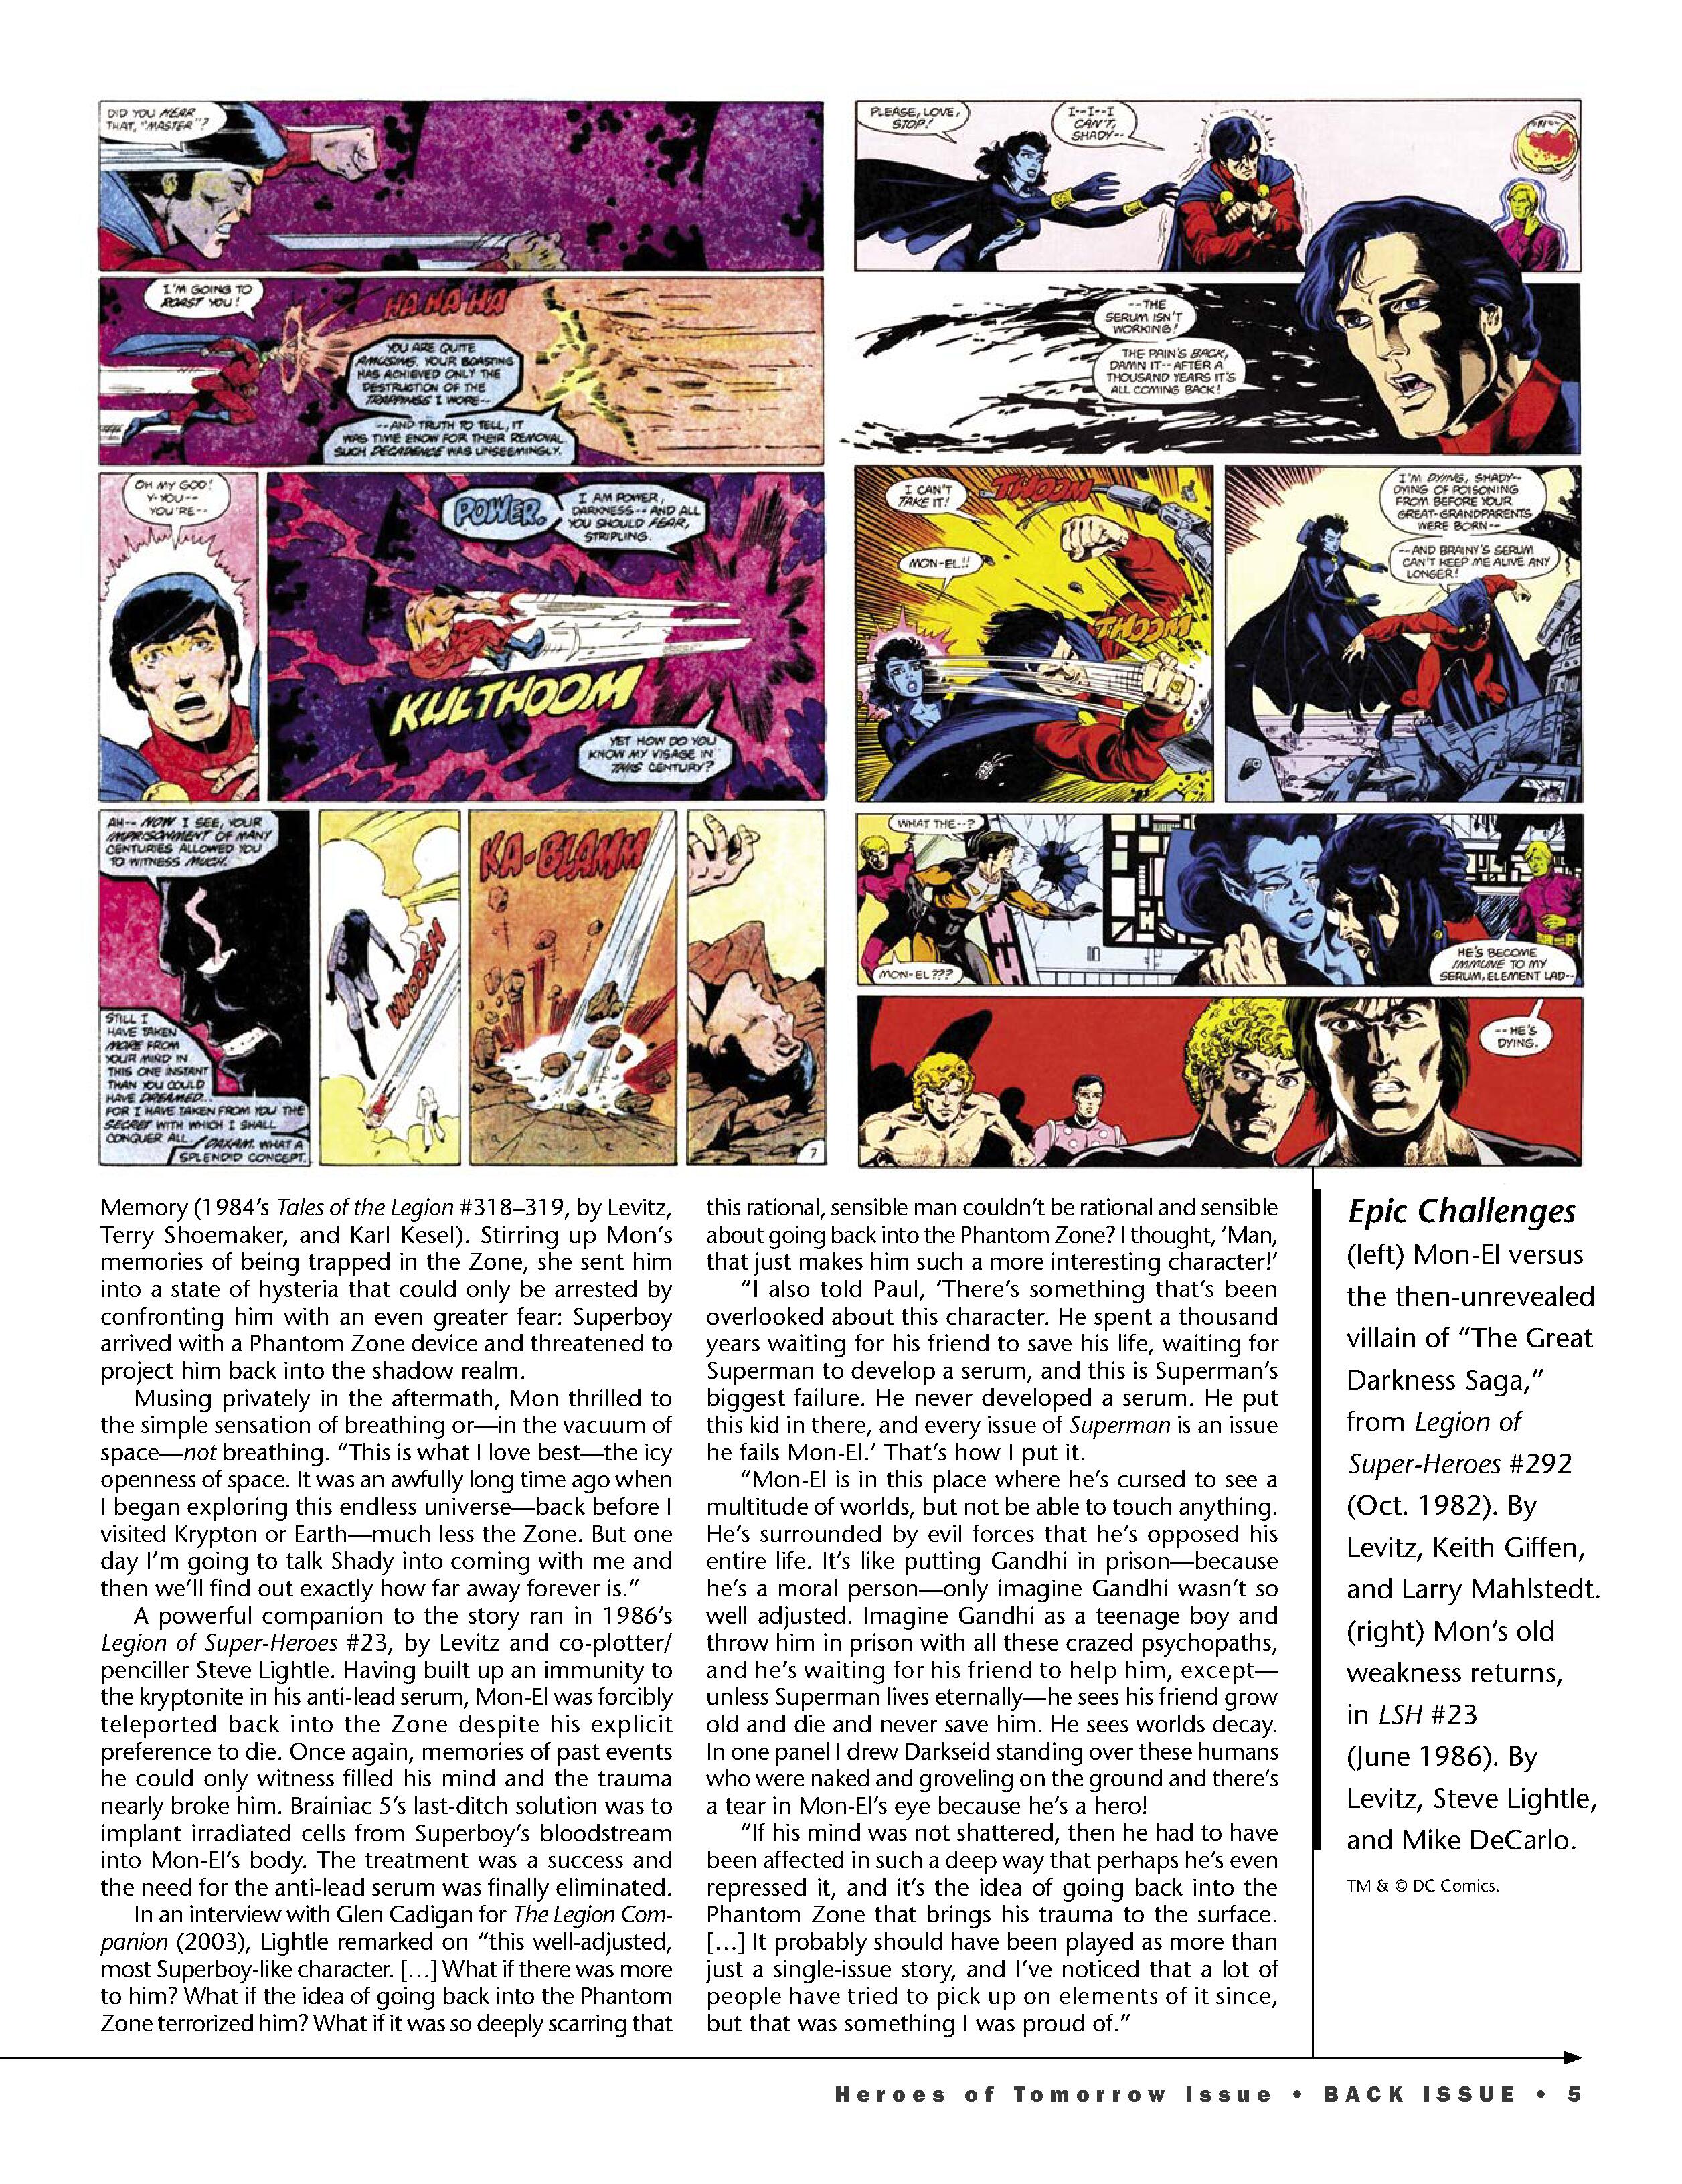 Read online Back Issue comic -  Issue #120 - 7